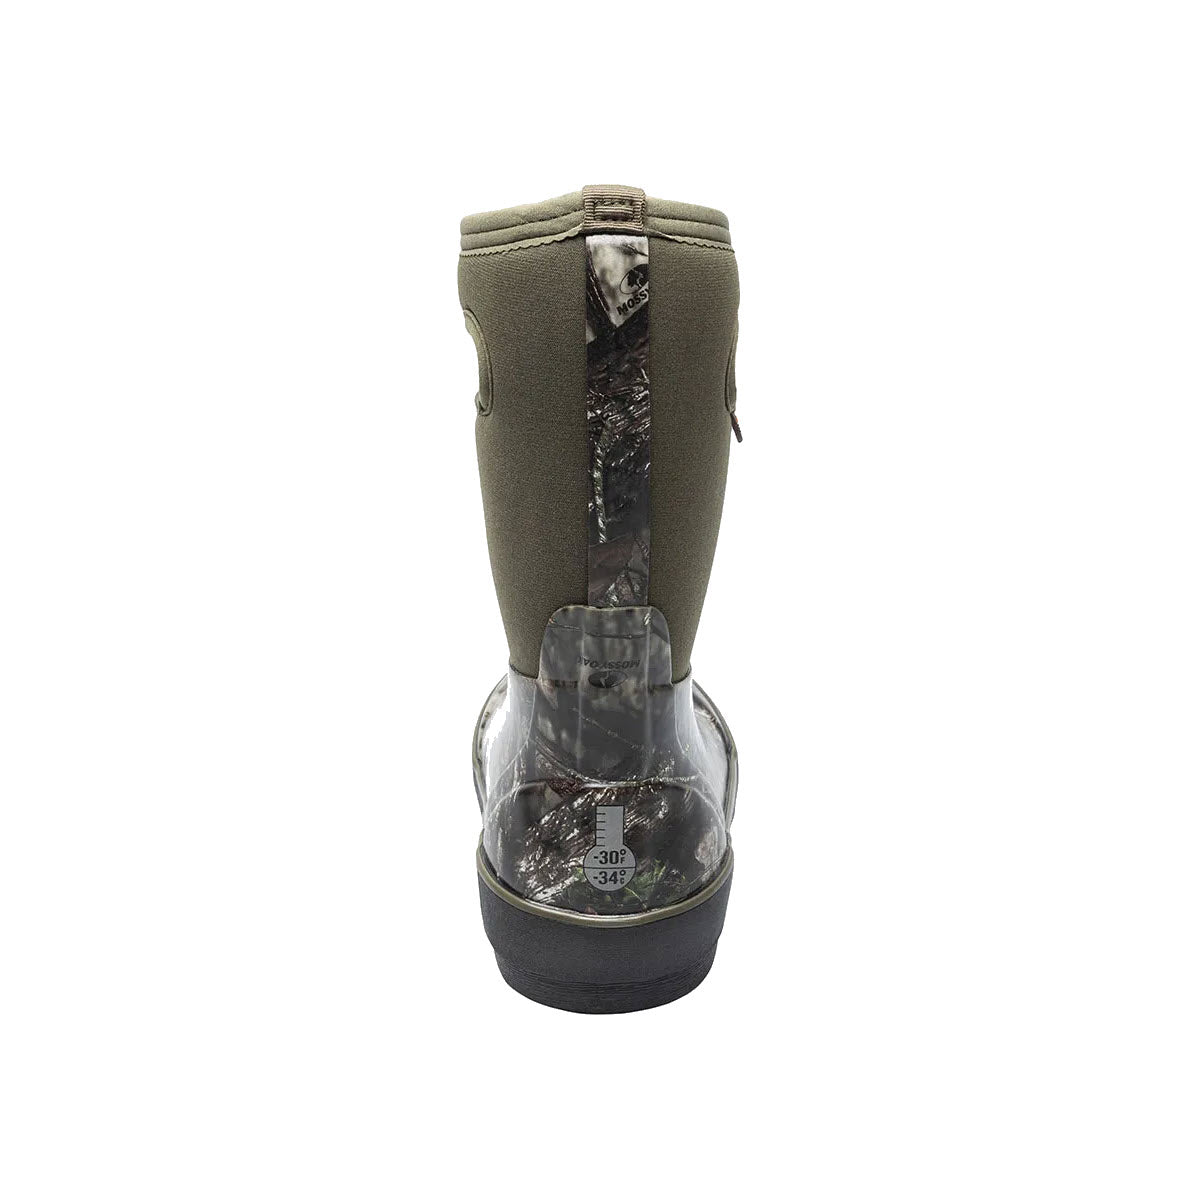 Front view of a Bogs Kids&#39; Classics khaki and camouflage print boot with visible size label on the sole.